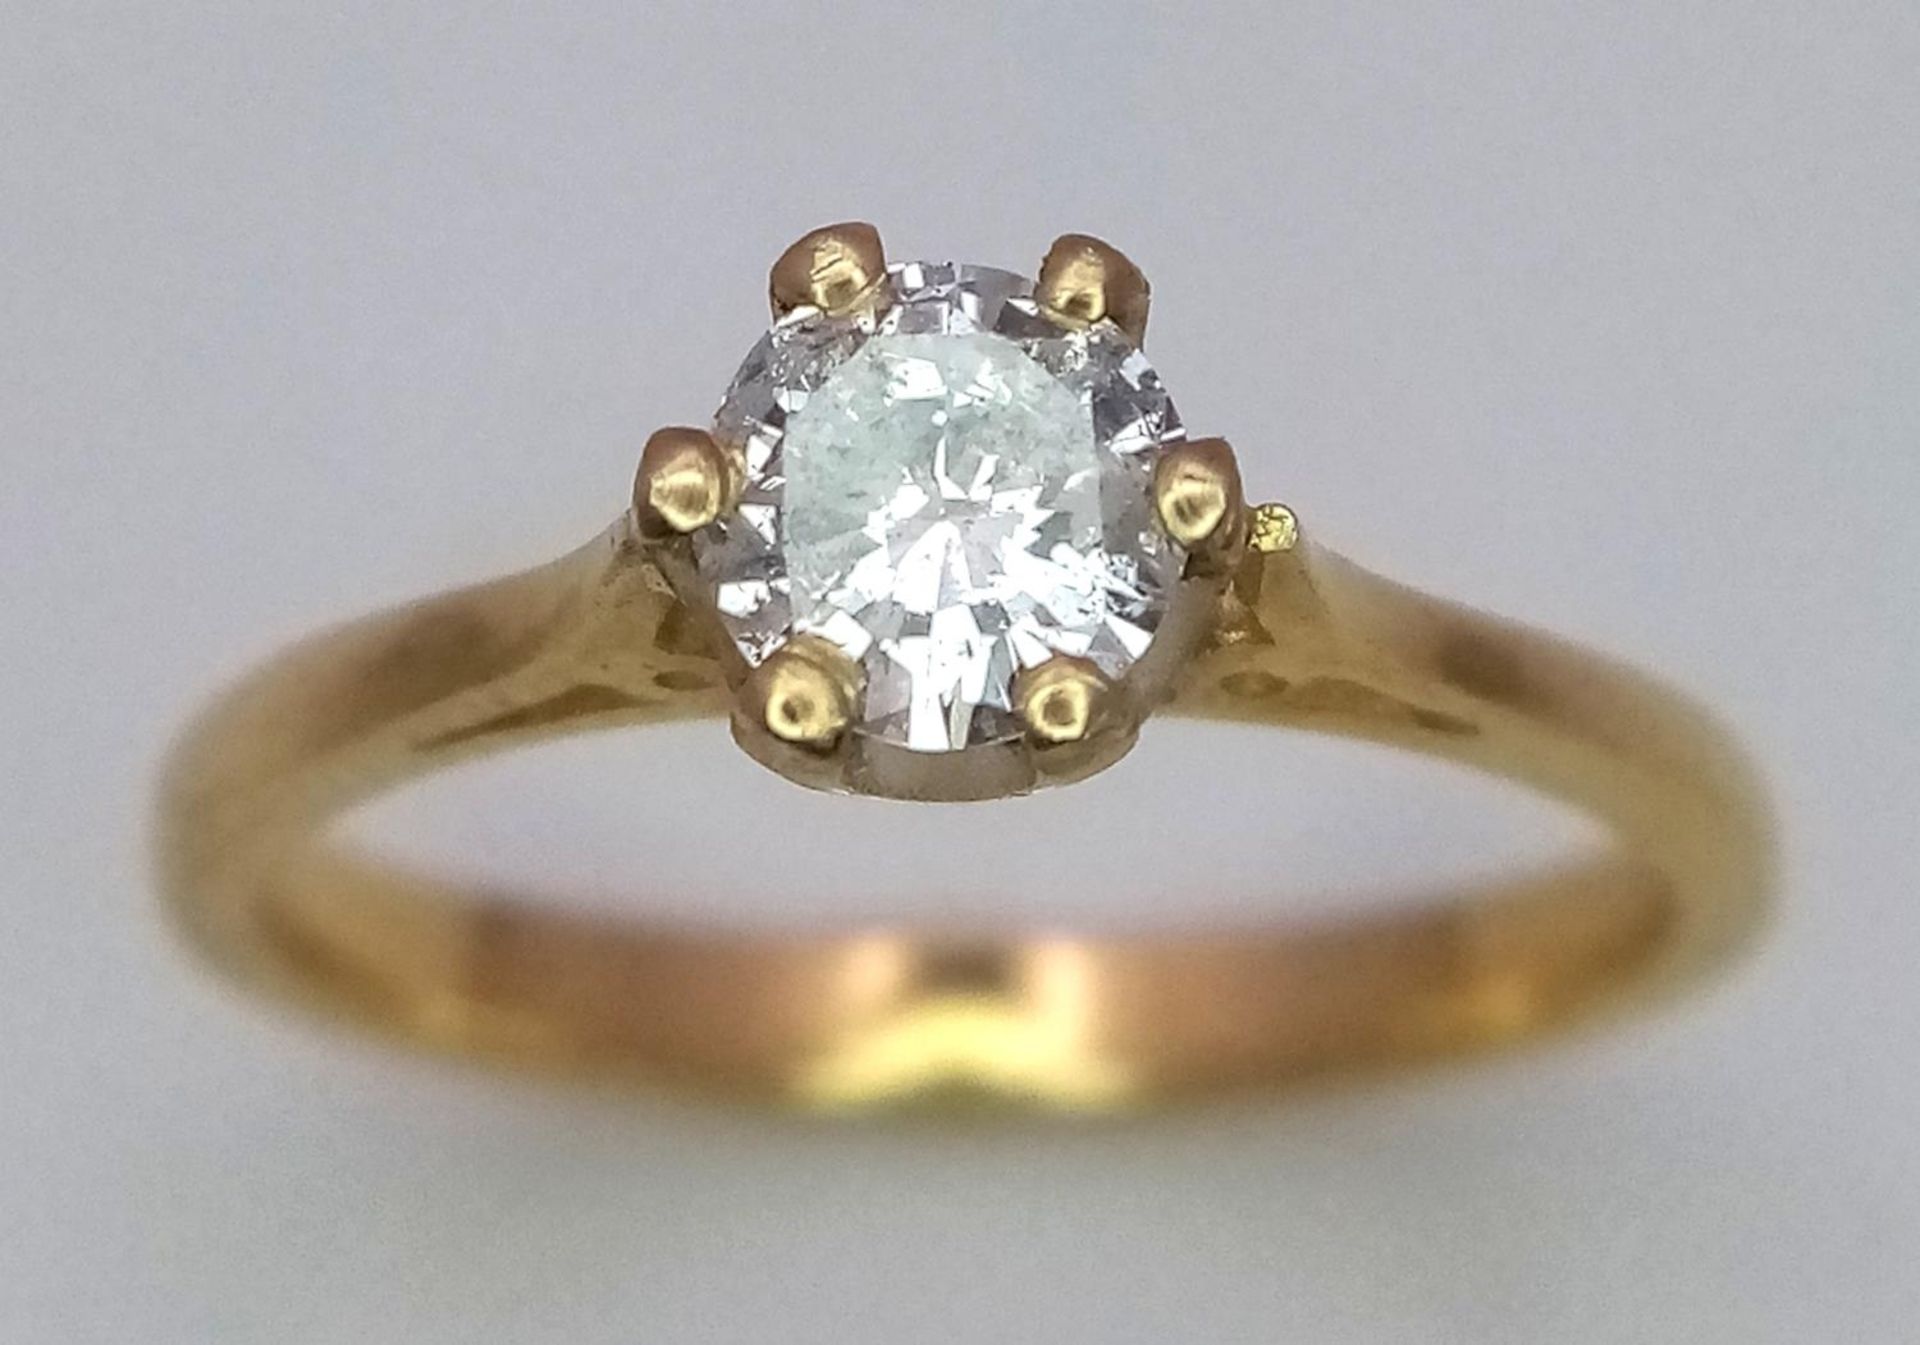 A 18K (TESTED AS) YELLOW GOLD DIAMOND SOLITAIRE RING 0.45CT 2.7G SIZE M SPAS 9002 - Image 2 of 4